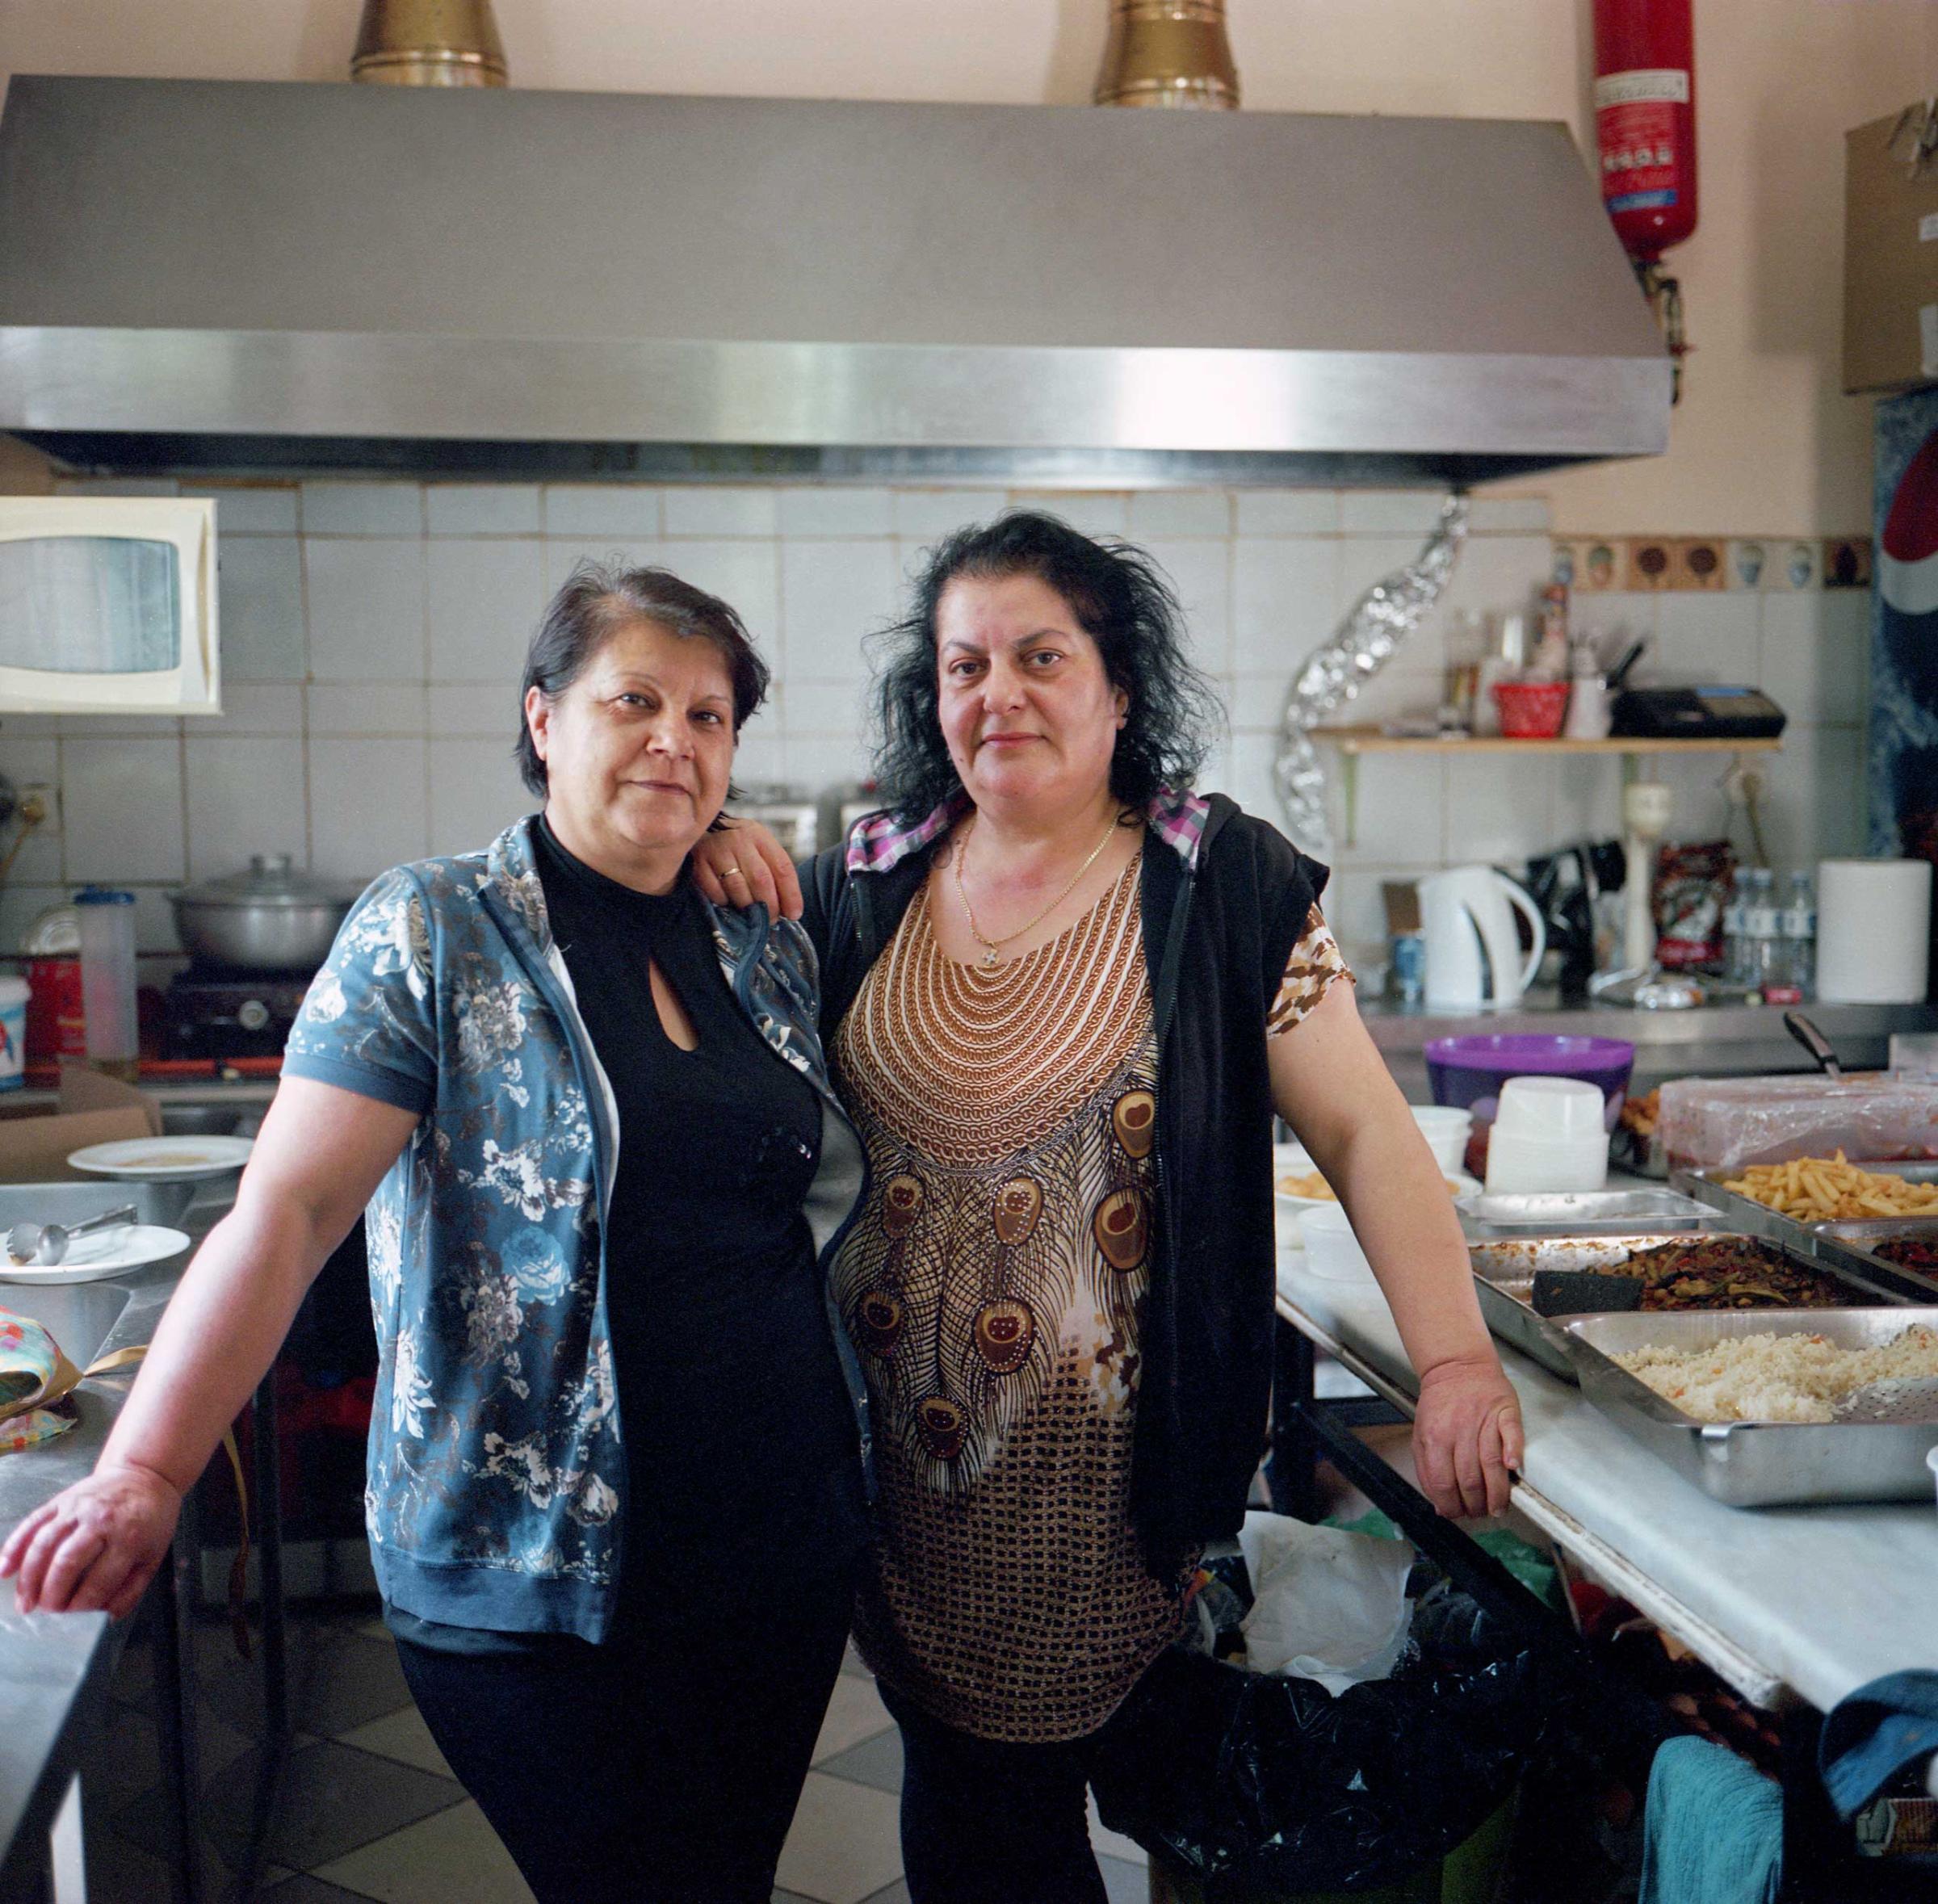 Nopi Pantelidou (left) and Gianna Konstantinidou work in the kitchen at a cafe in Idomeni. A small canteen that used to serve local residents and others passing through the Idomeni train station is now overflown with refugees. They come here to charge their phones and tablets and use the free WiFi. Some can afford a meal, but most pass their time playing cards, smoking and making calls to relatives abroad. Idomeni, Greece, April 2016